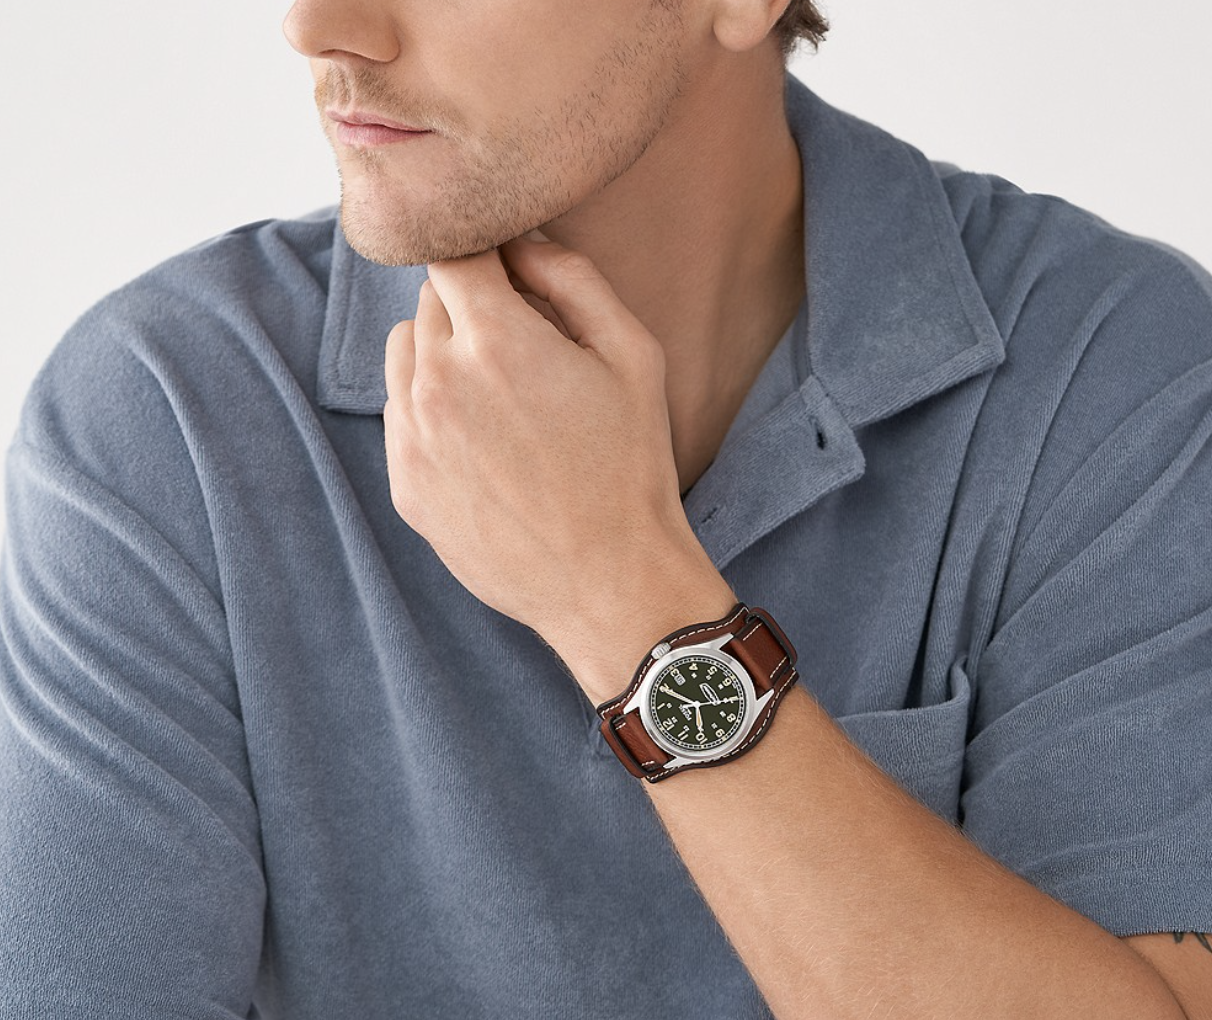 Save on Fossil men's watches with Fossil coupons